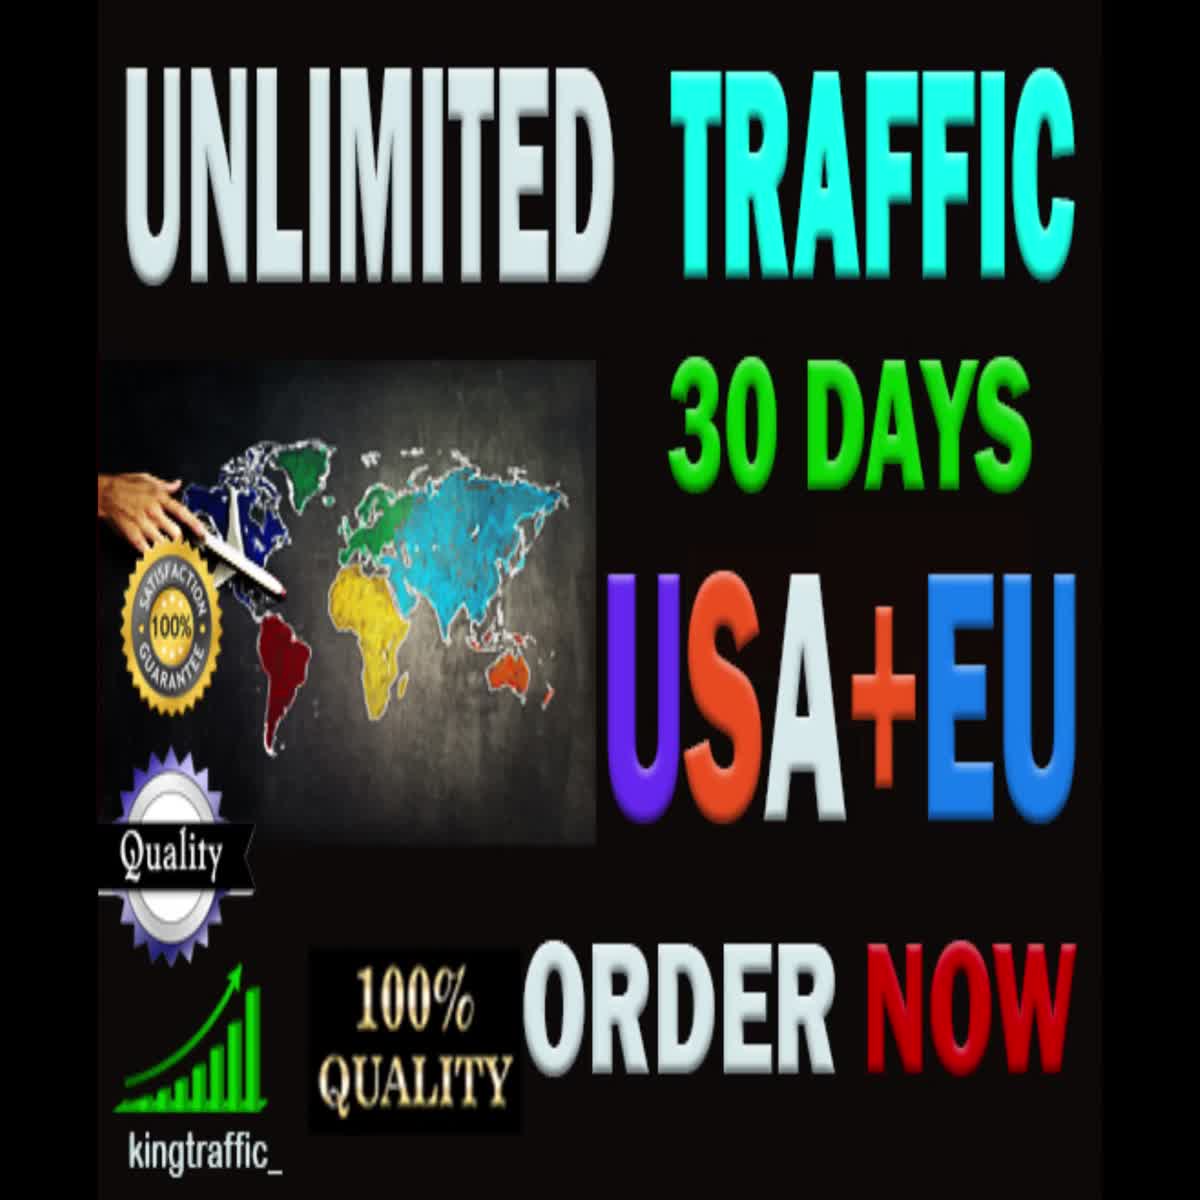 UNLIMITED Active High Quality Organic Worldwide Real web traffic